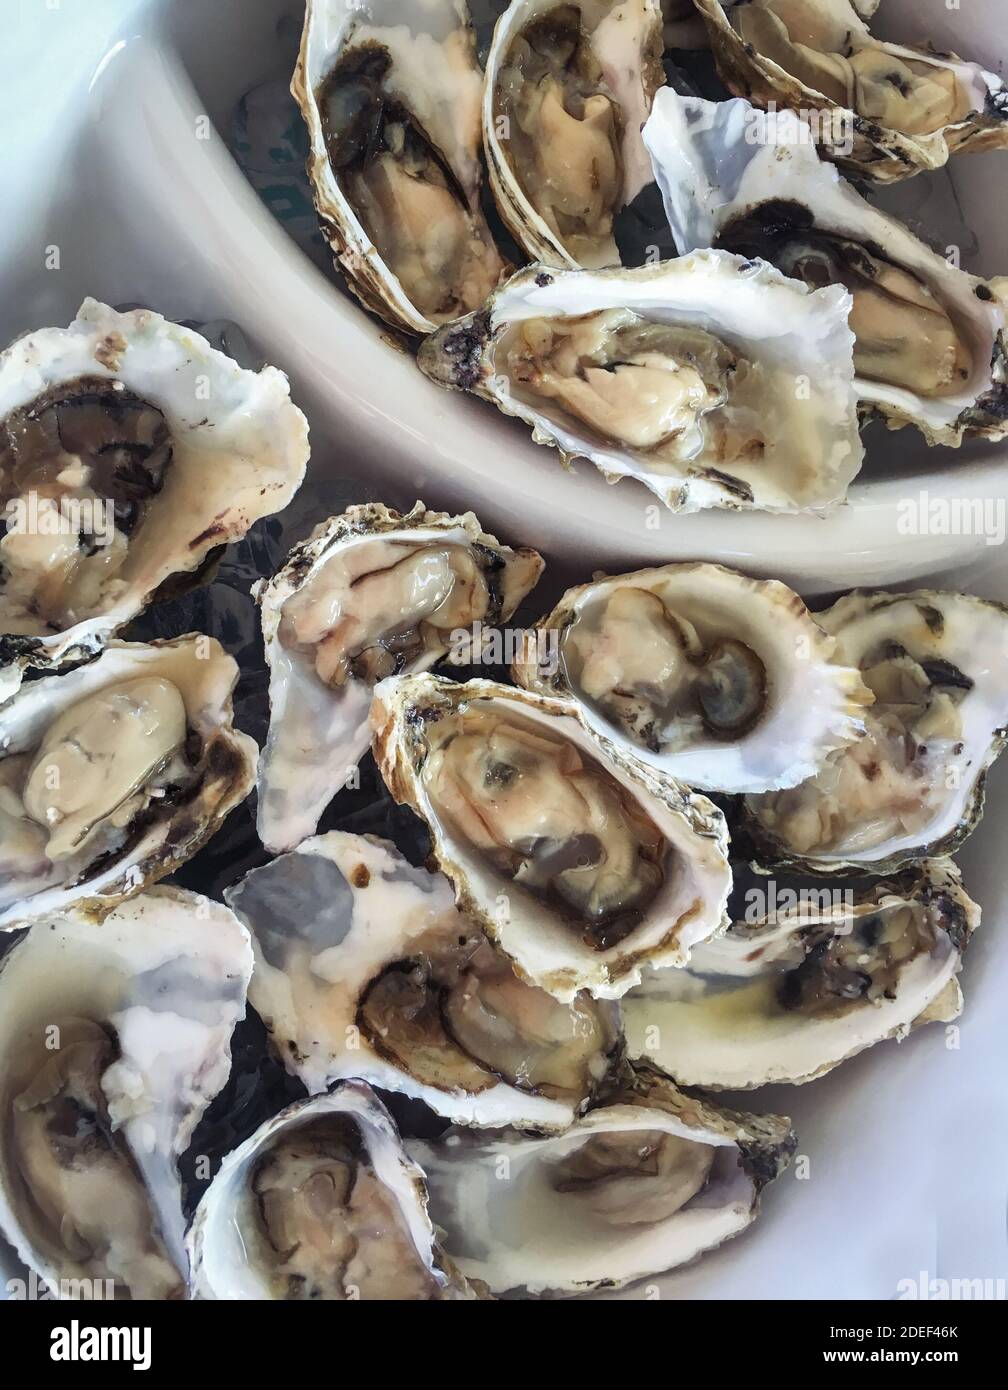 Shucked oysters on the half shell on ice in a white bowl ready to eat. Close-up. Stock Photo